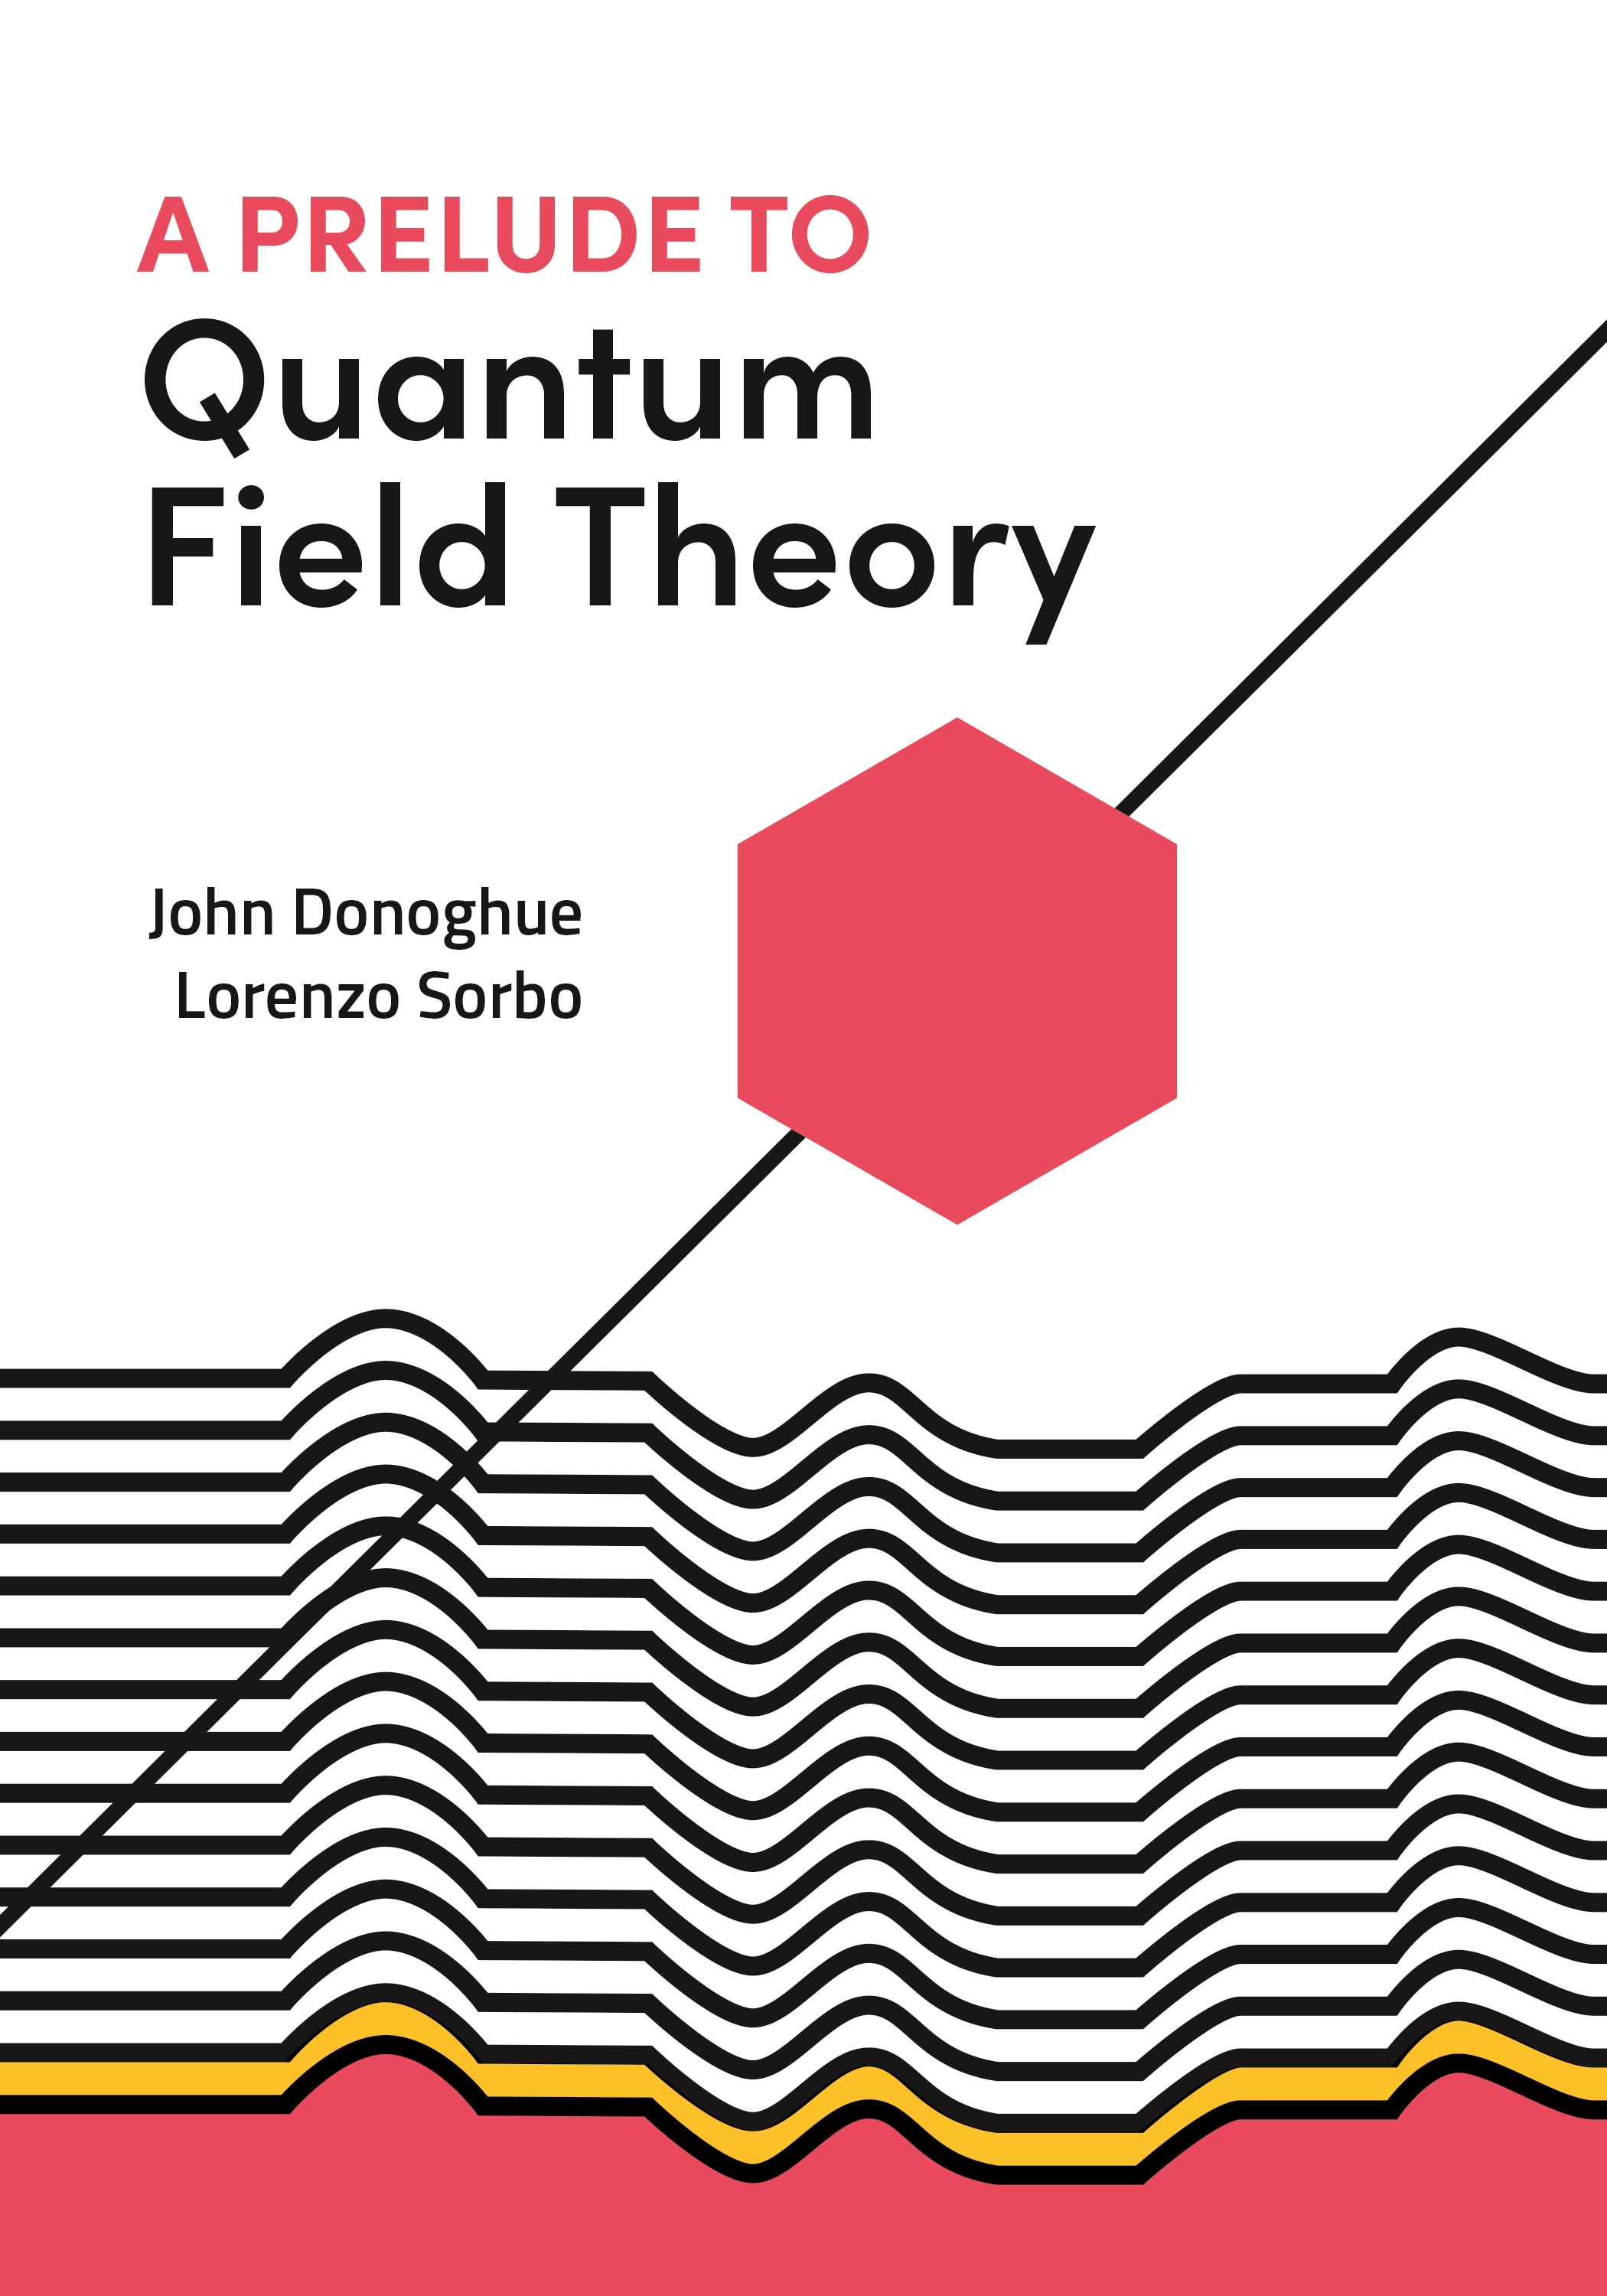 This Is Why Quantum Field Theory Is More Fundamental Than Quantum